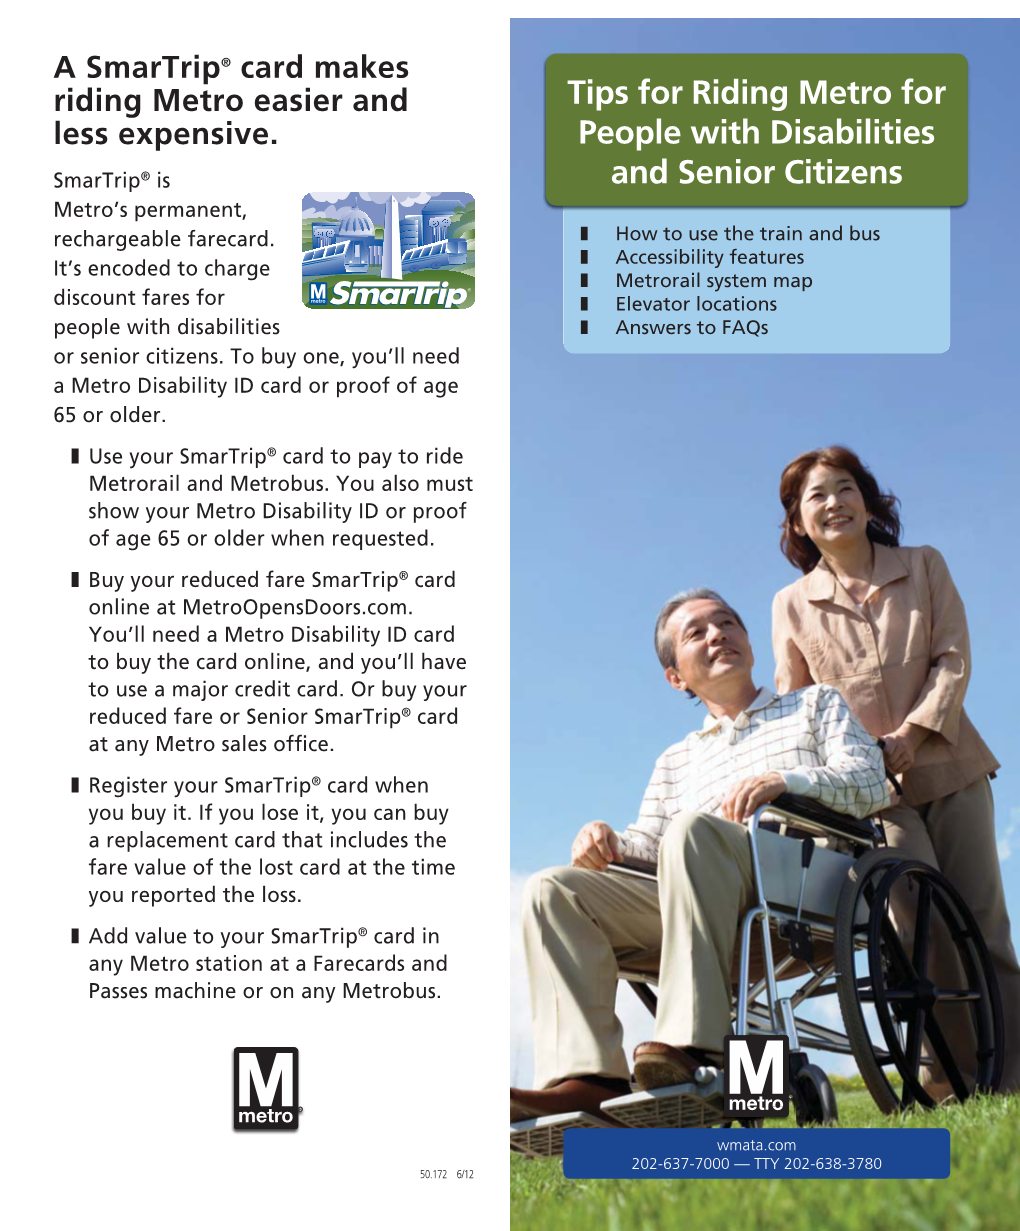 Tips for Riding Metro for People with Disabilities and Senior Citizens